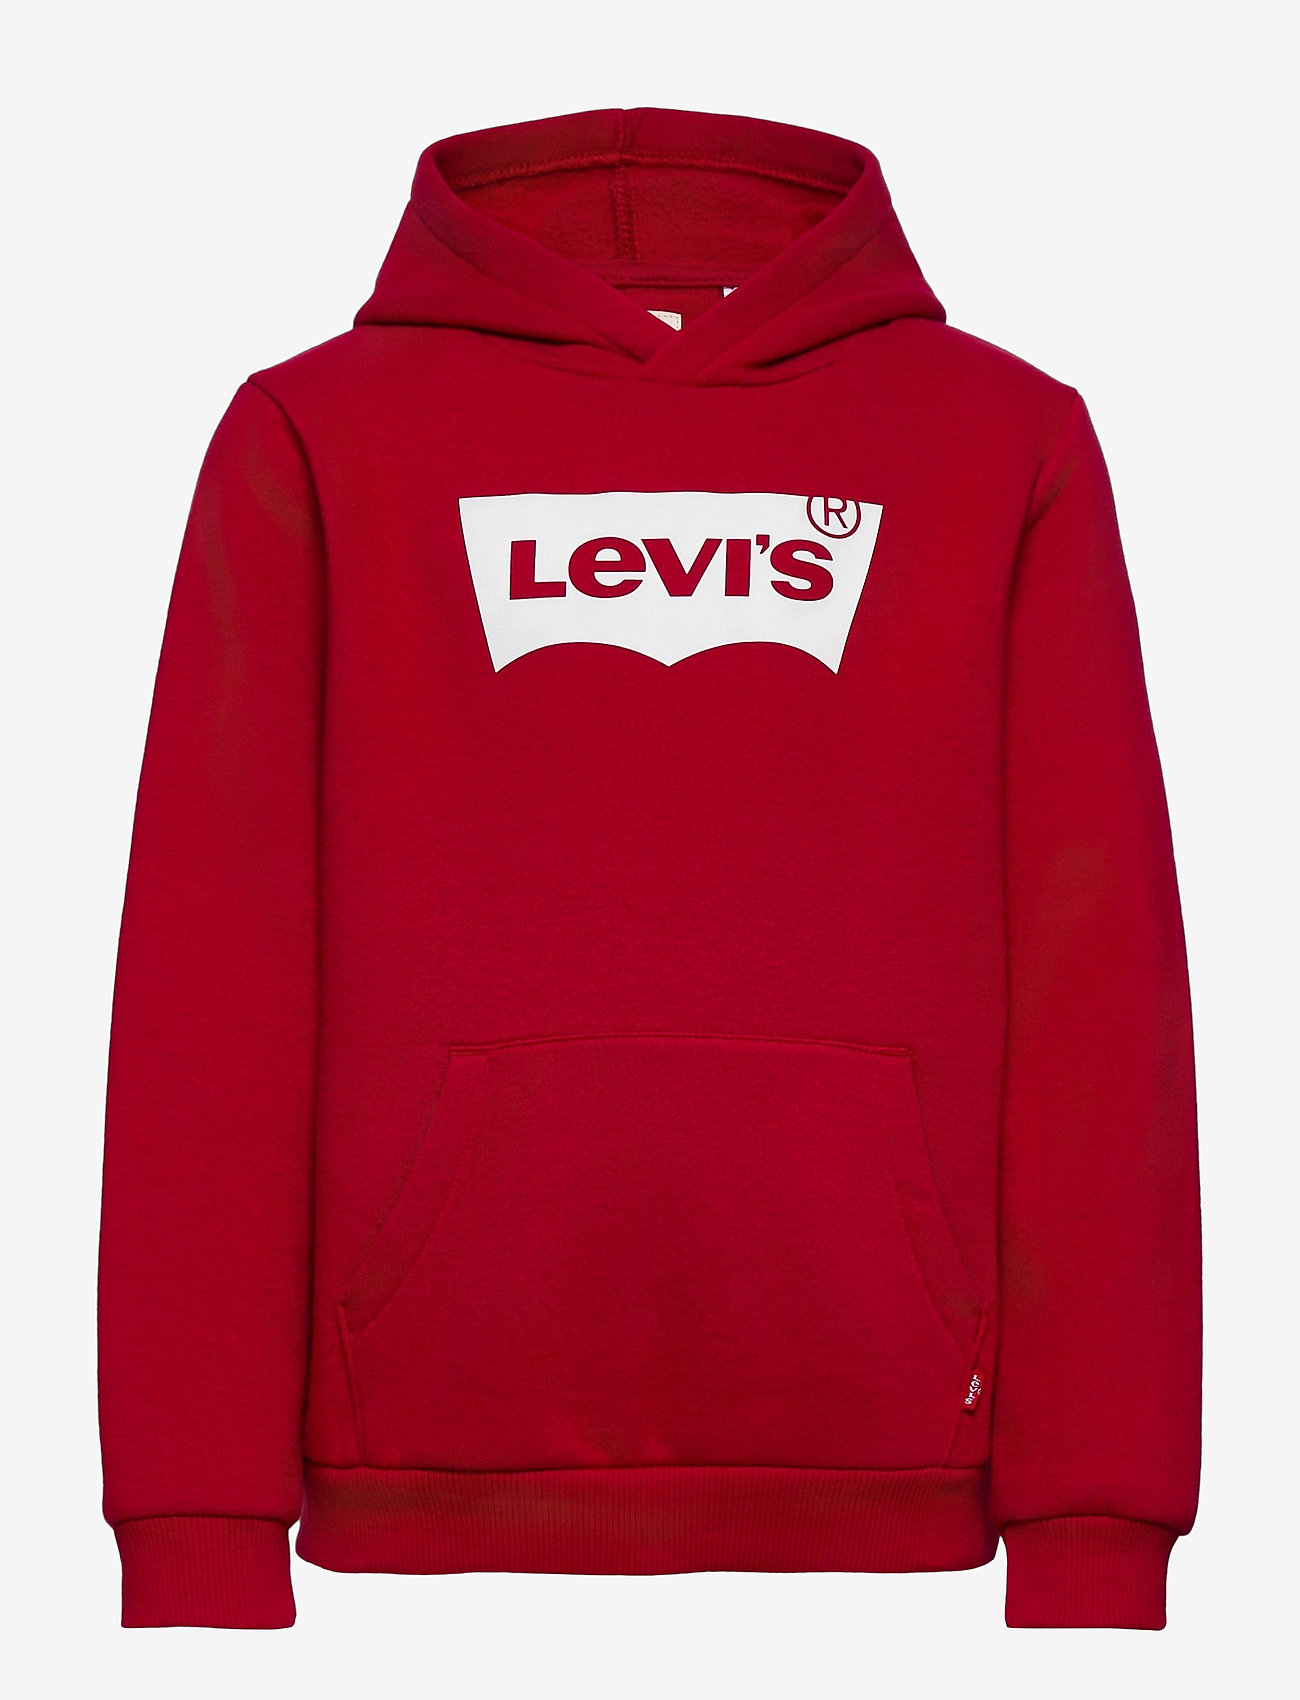 Levi's - Levi's® Batwing Screenprint Hooded Pullover - hoodies - levis red/white - 0